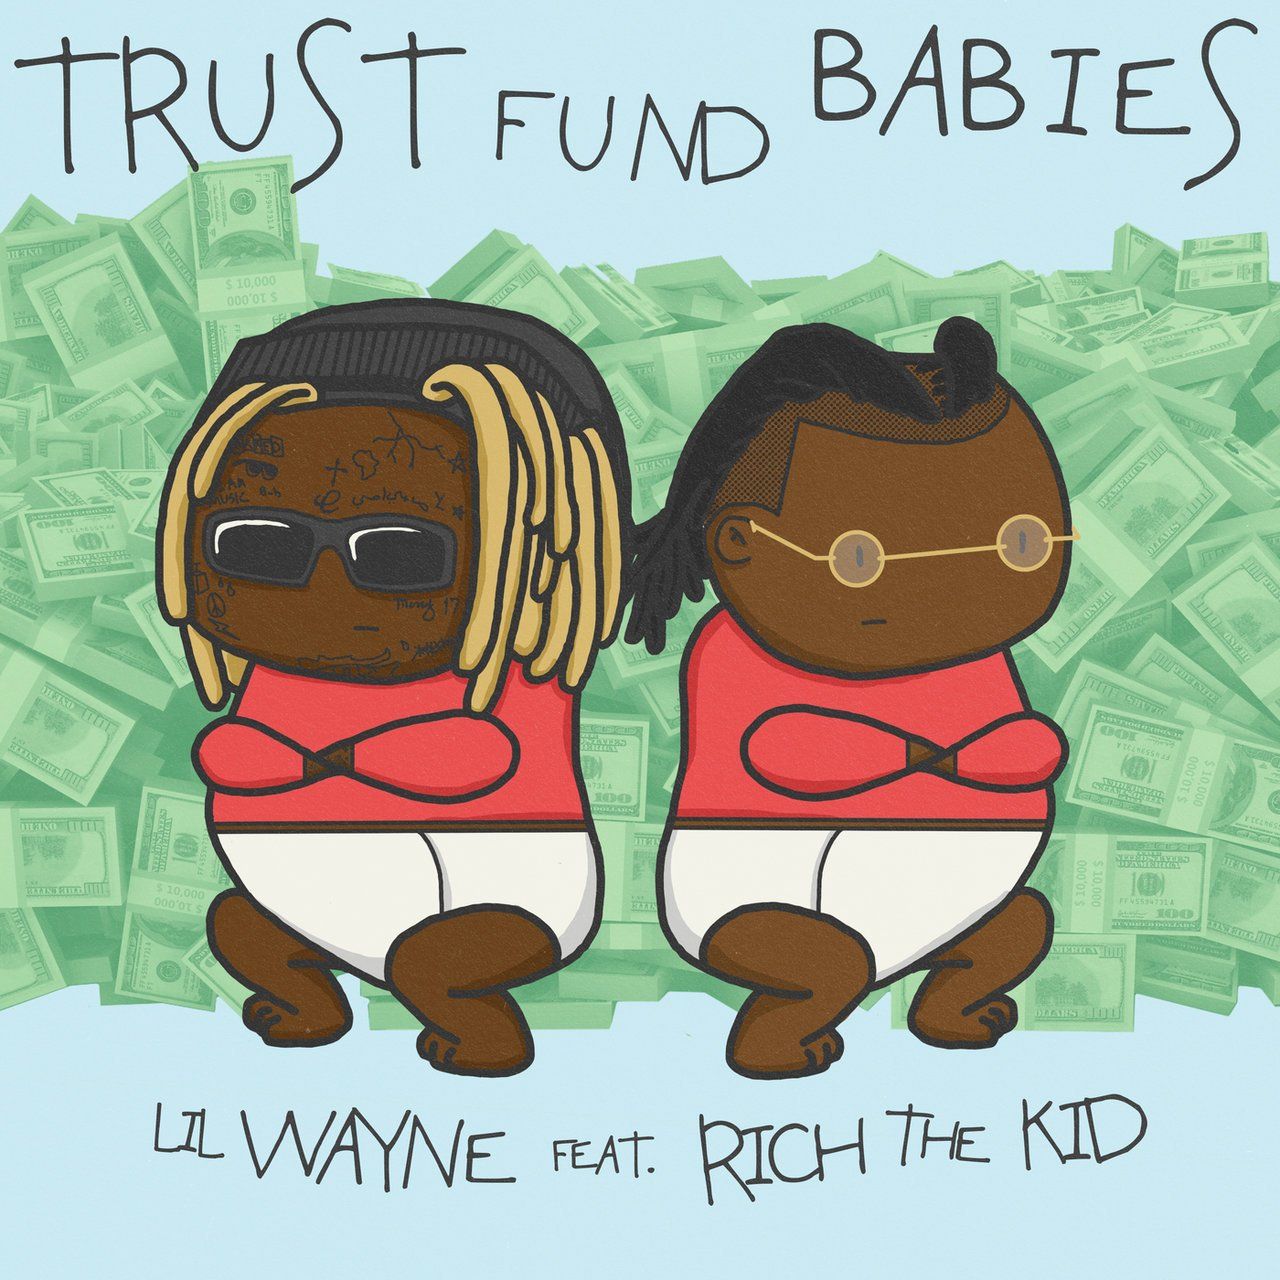 Lil Wayne and Rich The Kid show a disappointing lack of chemistry on "Trust Fund Babies"